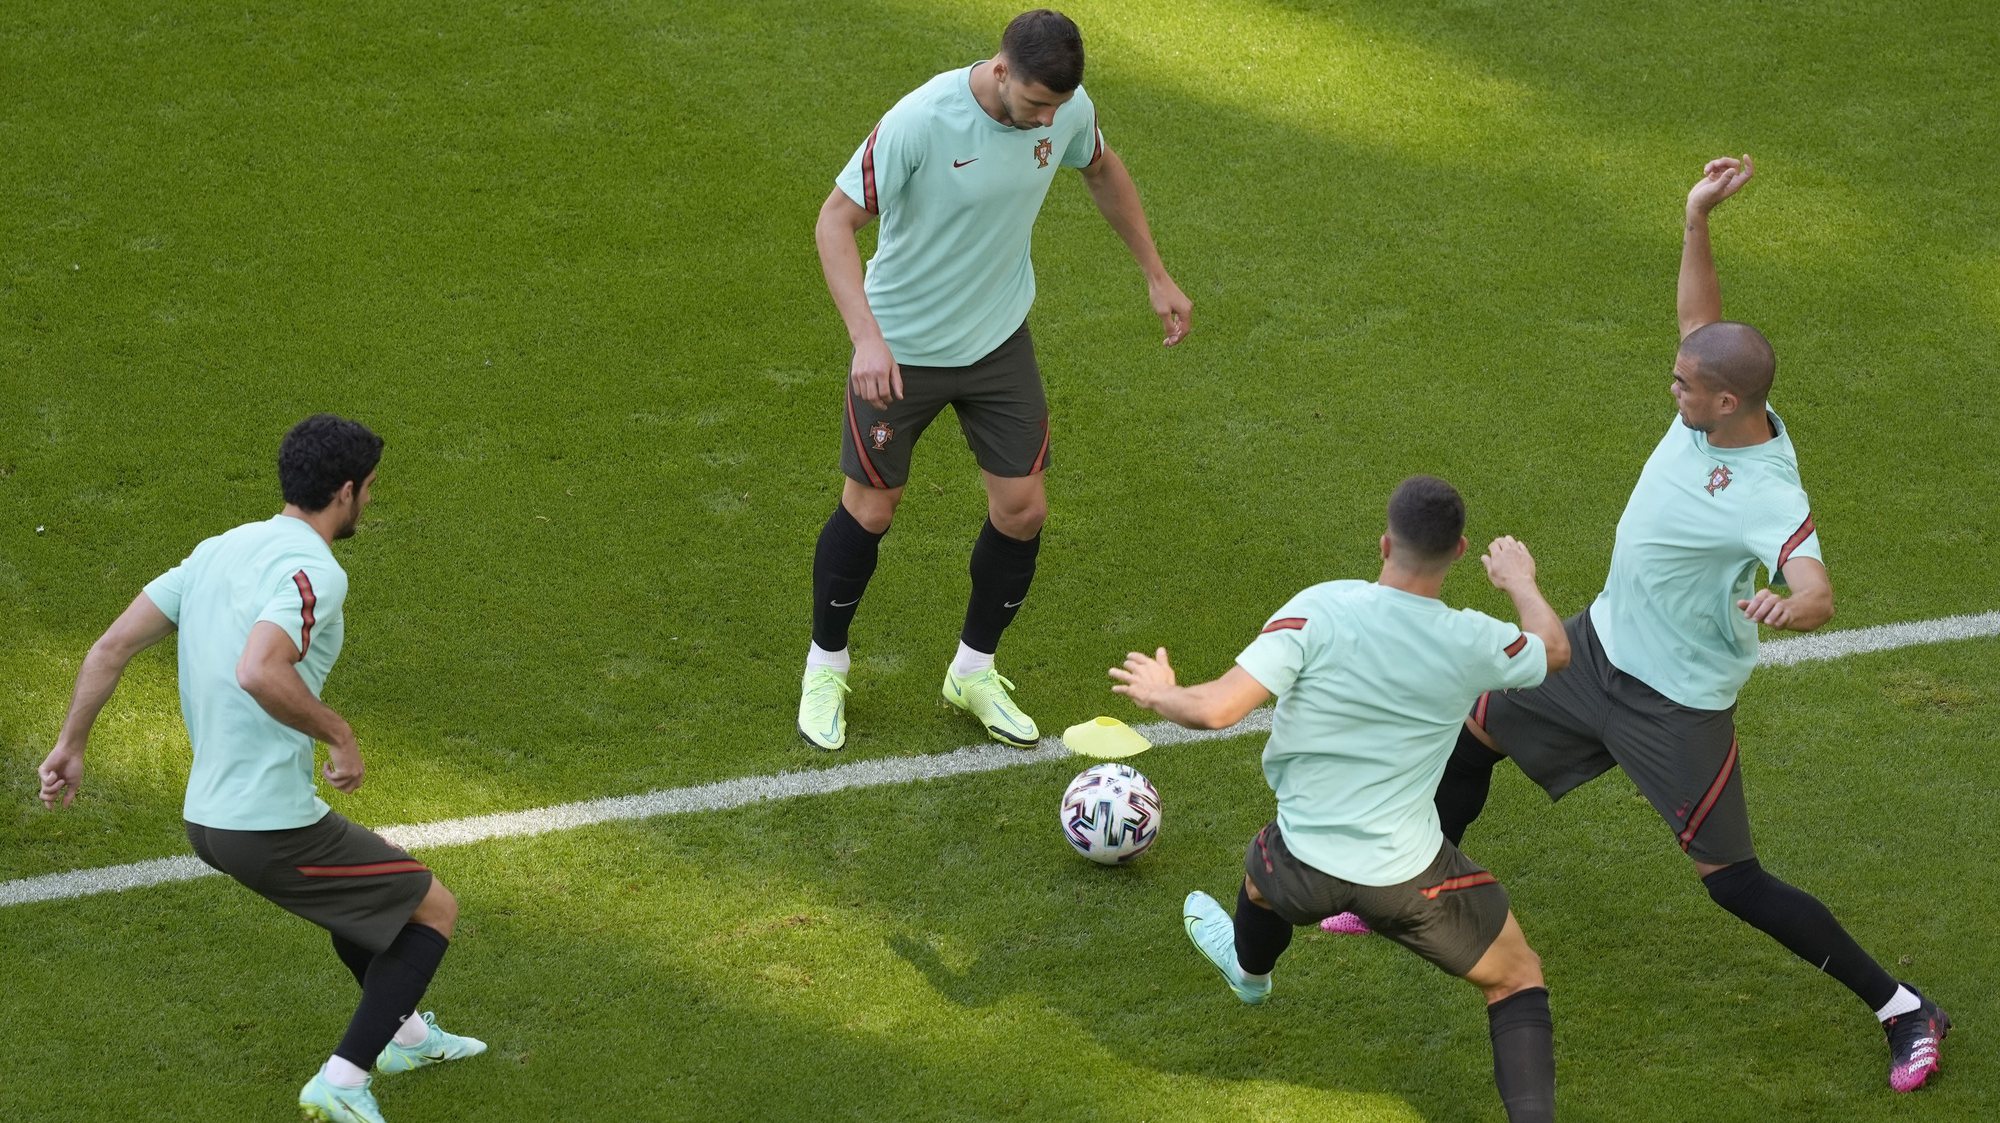 Portugal´s national soccer team players in action during a training session at Allianz Arena in Munich, Germany, 18 June 2021. Portugal will face Germany in their UEFA EURO 2020 group F round soccer match on 19 June 2021. HUGO DELGADO/LUSA